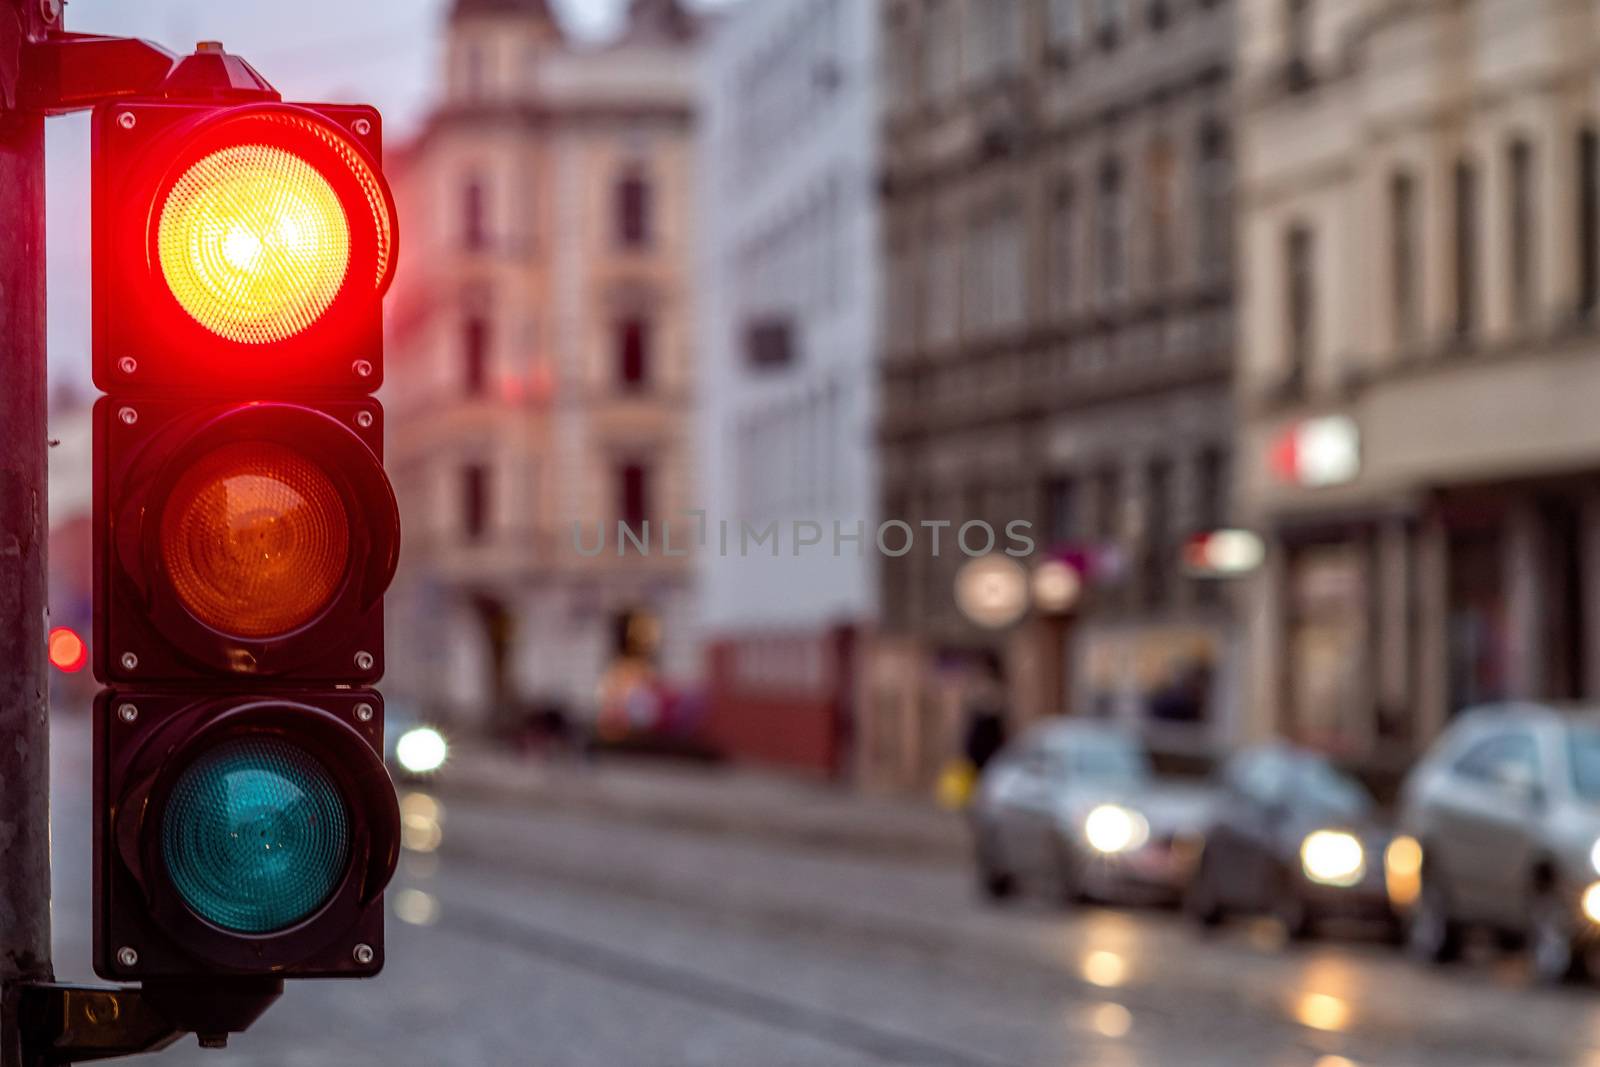 A city crossing with a semaphore. Red light in semaphore - image